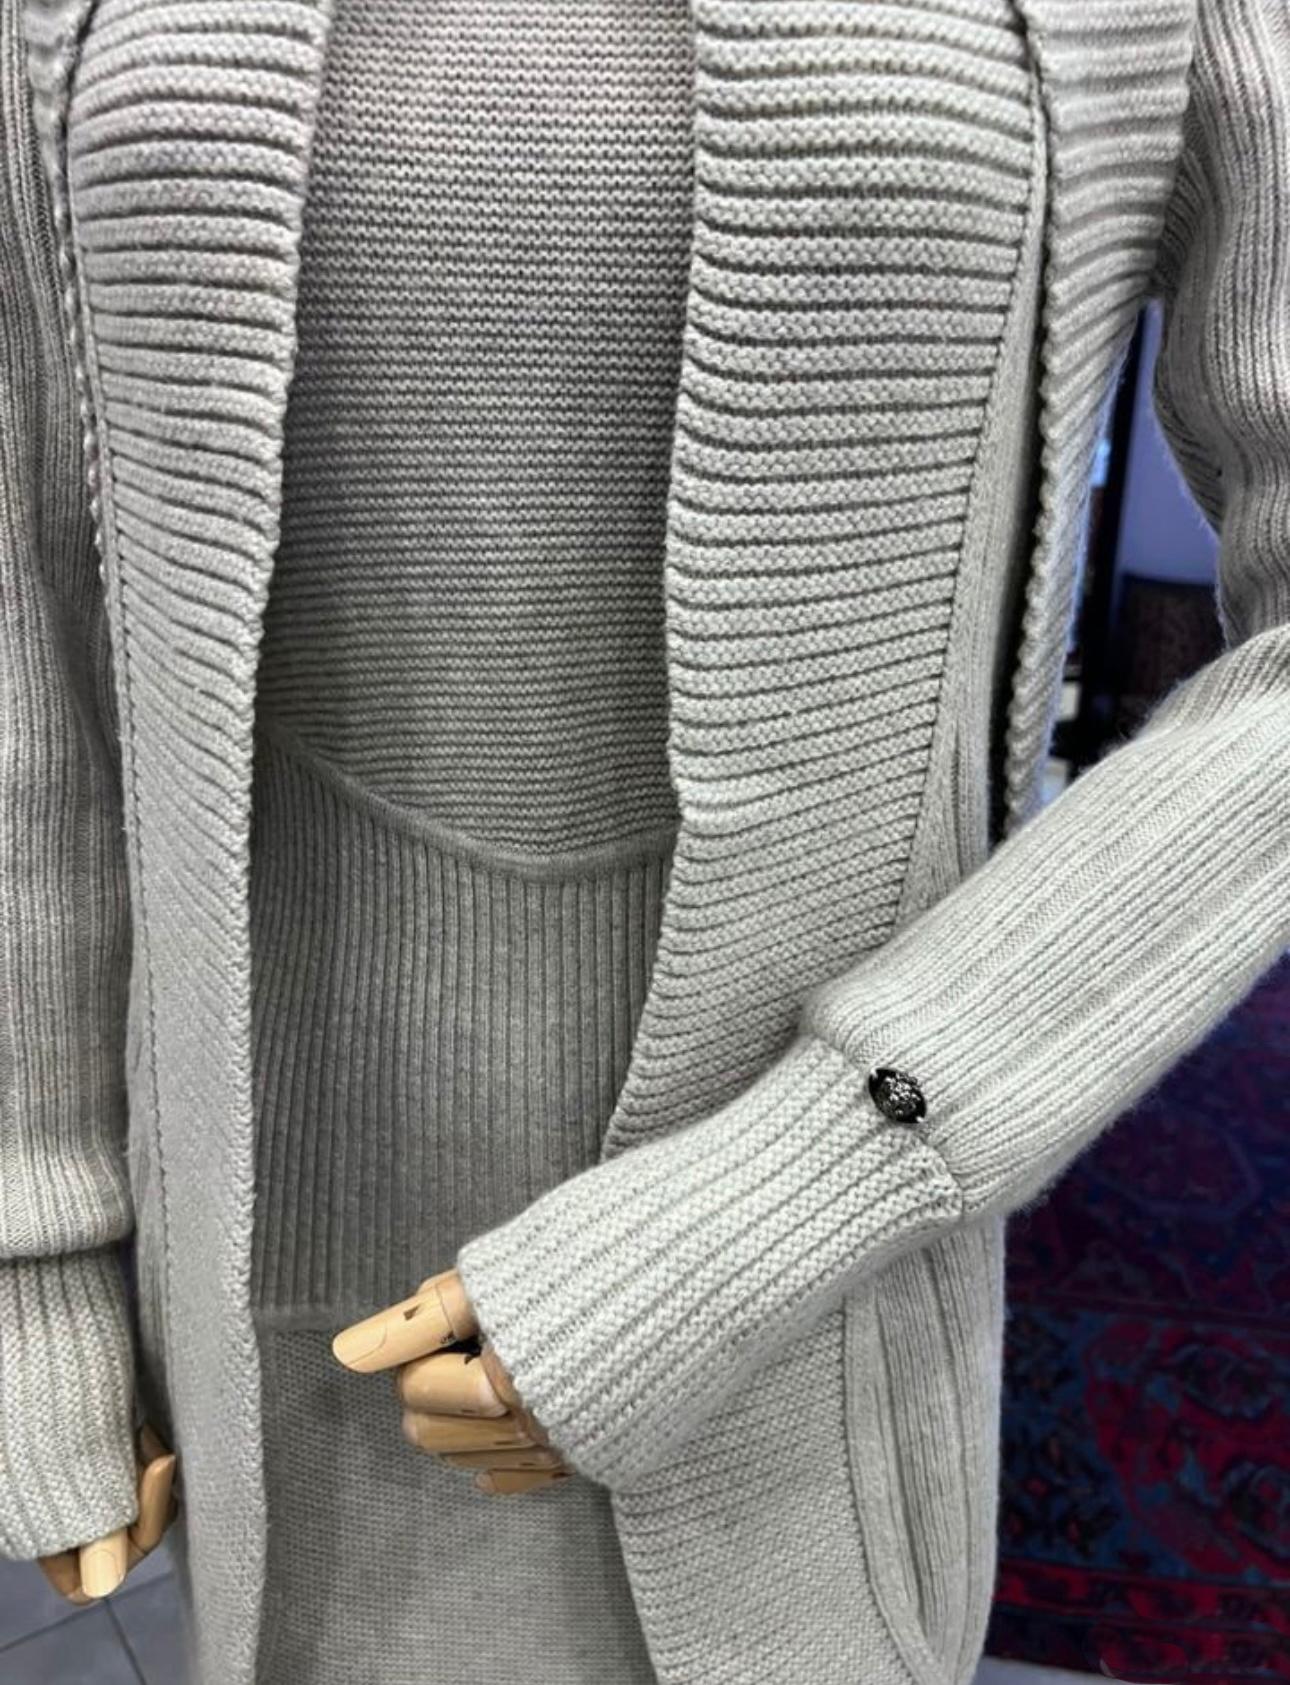 Chanel Paris / London Cashmere Cardigan And Dress Set In Excellent Condition For Sale In Dubai, AE